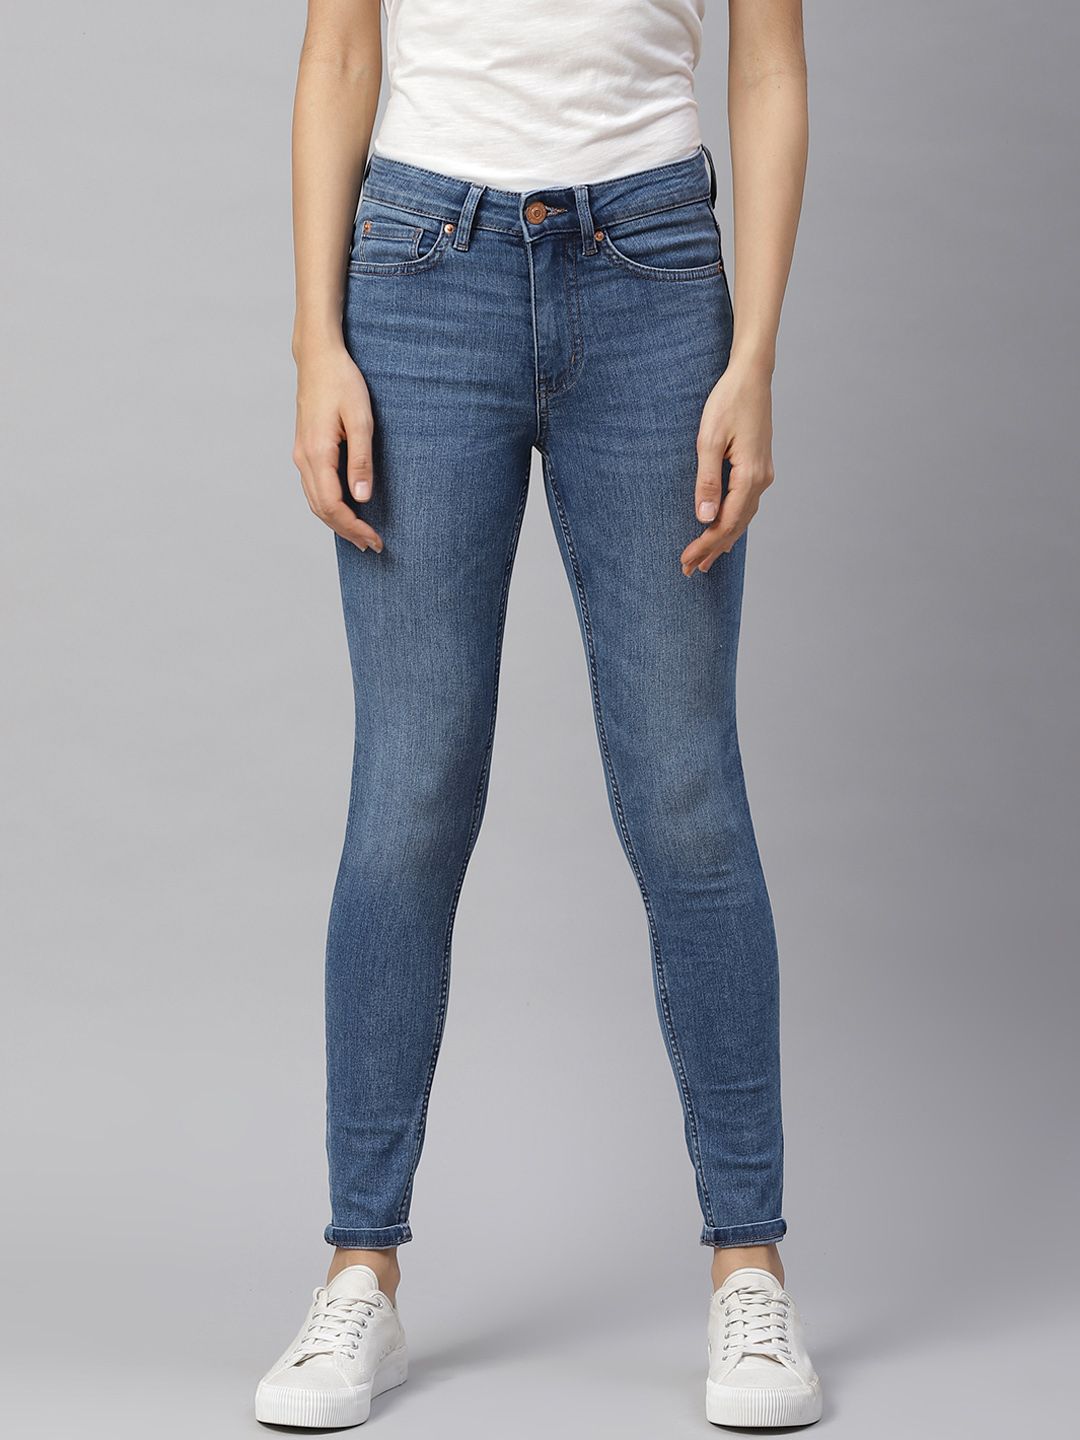 Marks & Spencer Women Blue Skinny Fit Mid-Rise Clean Look Stretchable Jeans Price in India